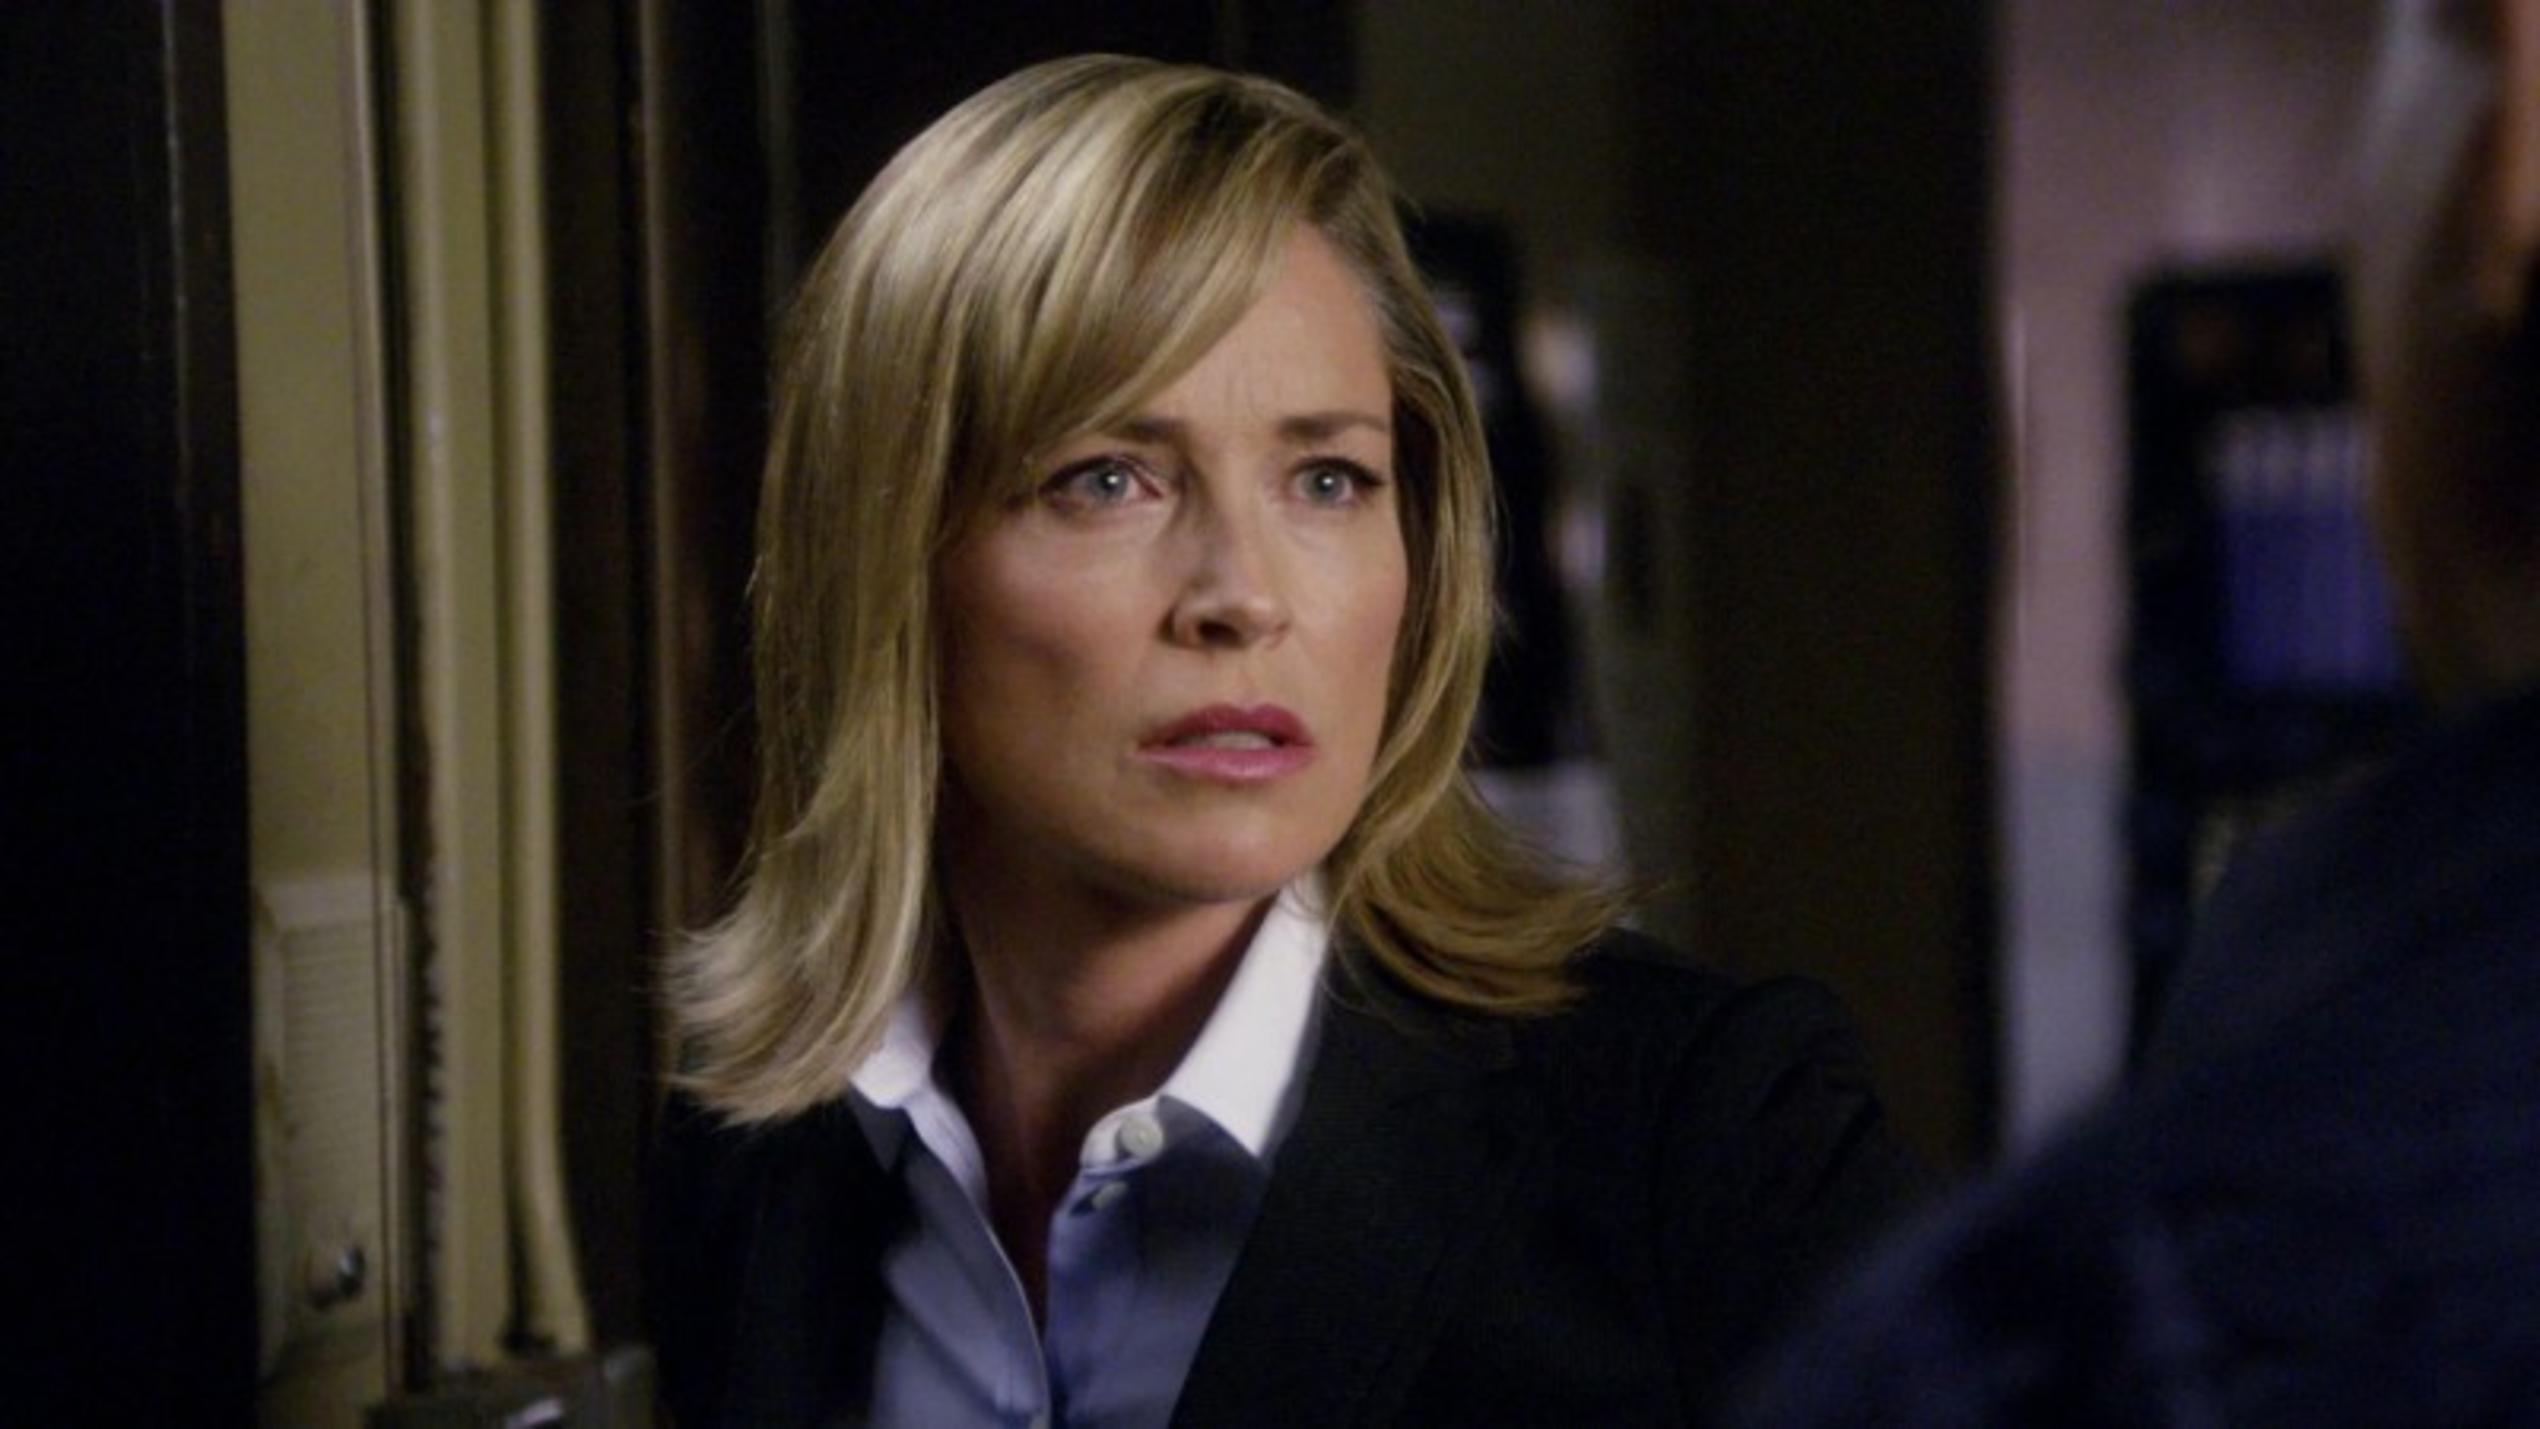 Sharon Stone in "Law & Order: SVU"